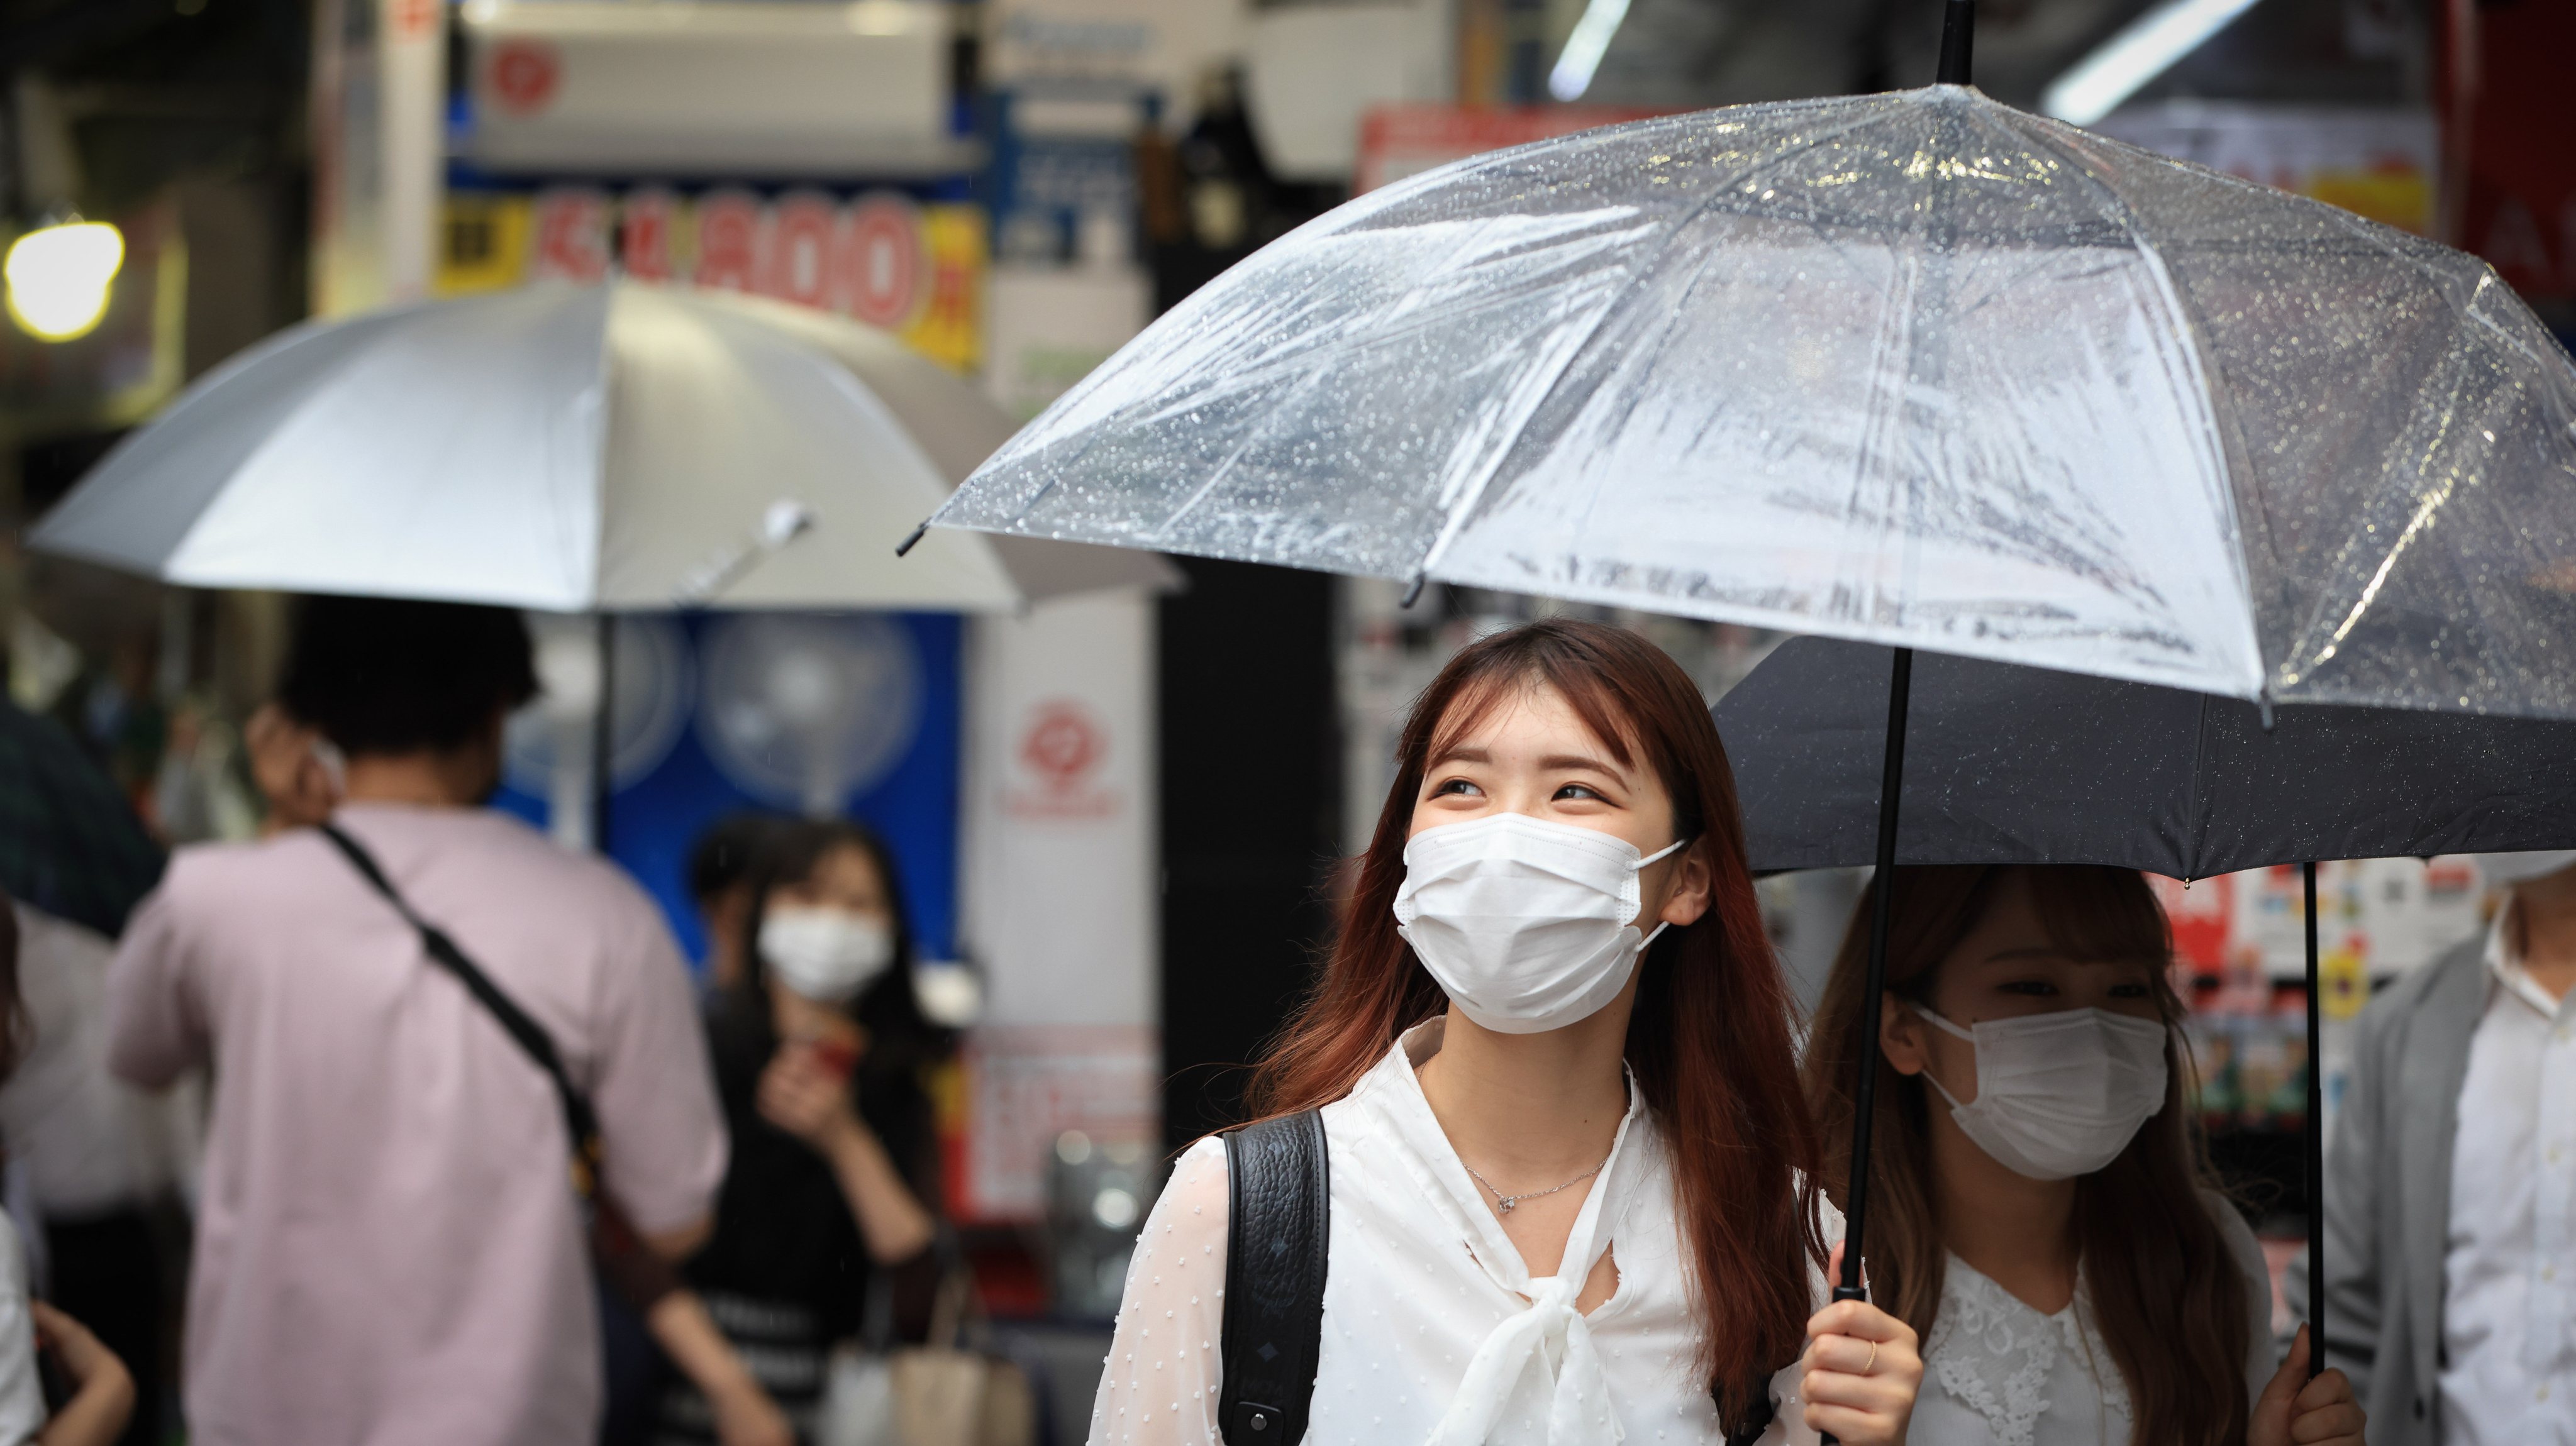 A woman wearing a face mask as a protective measure against